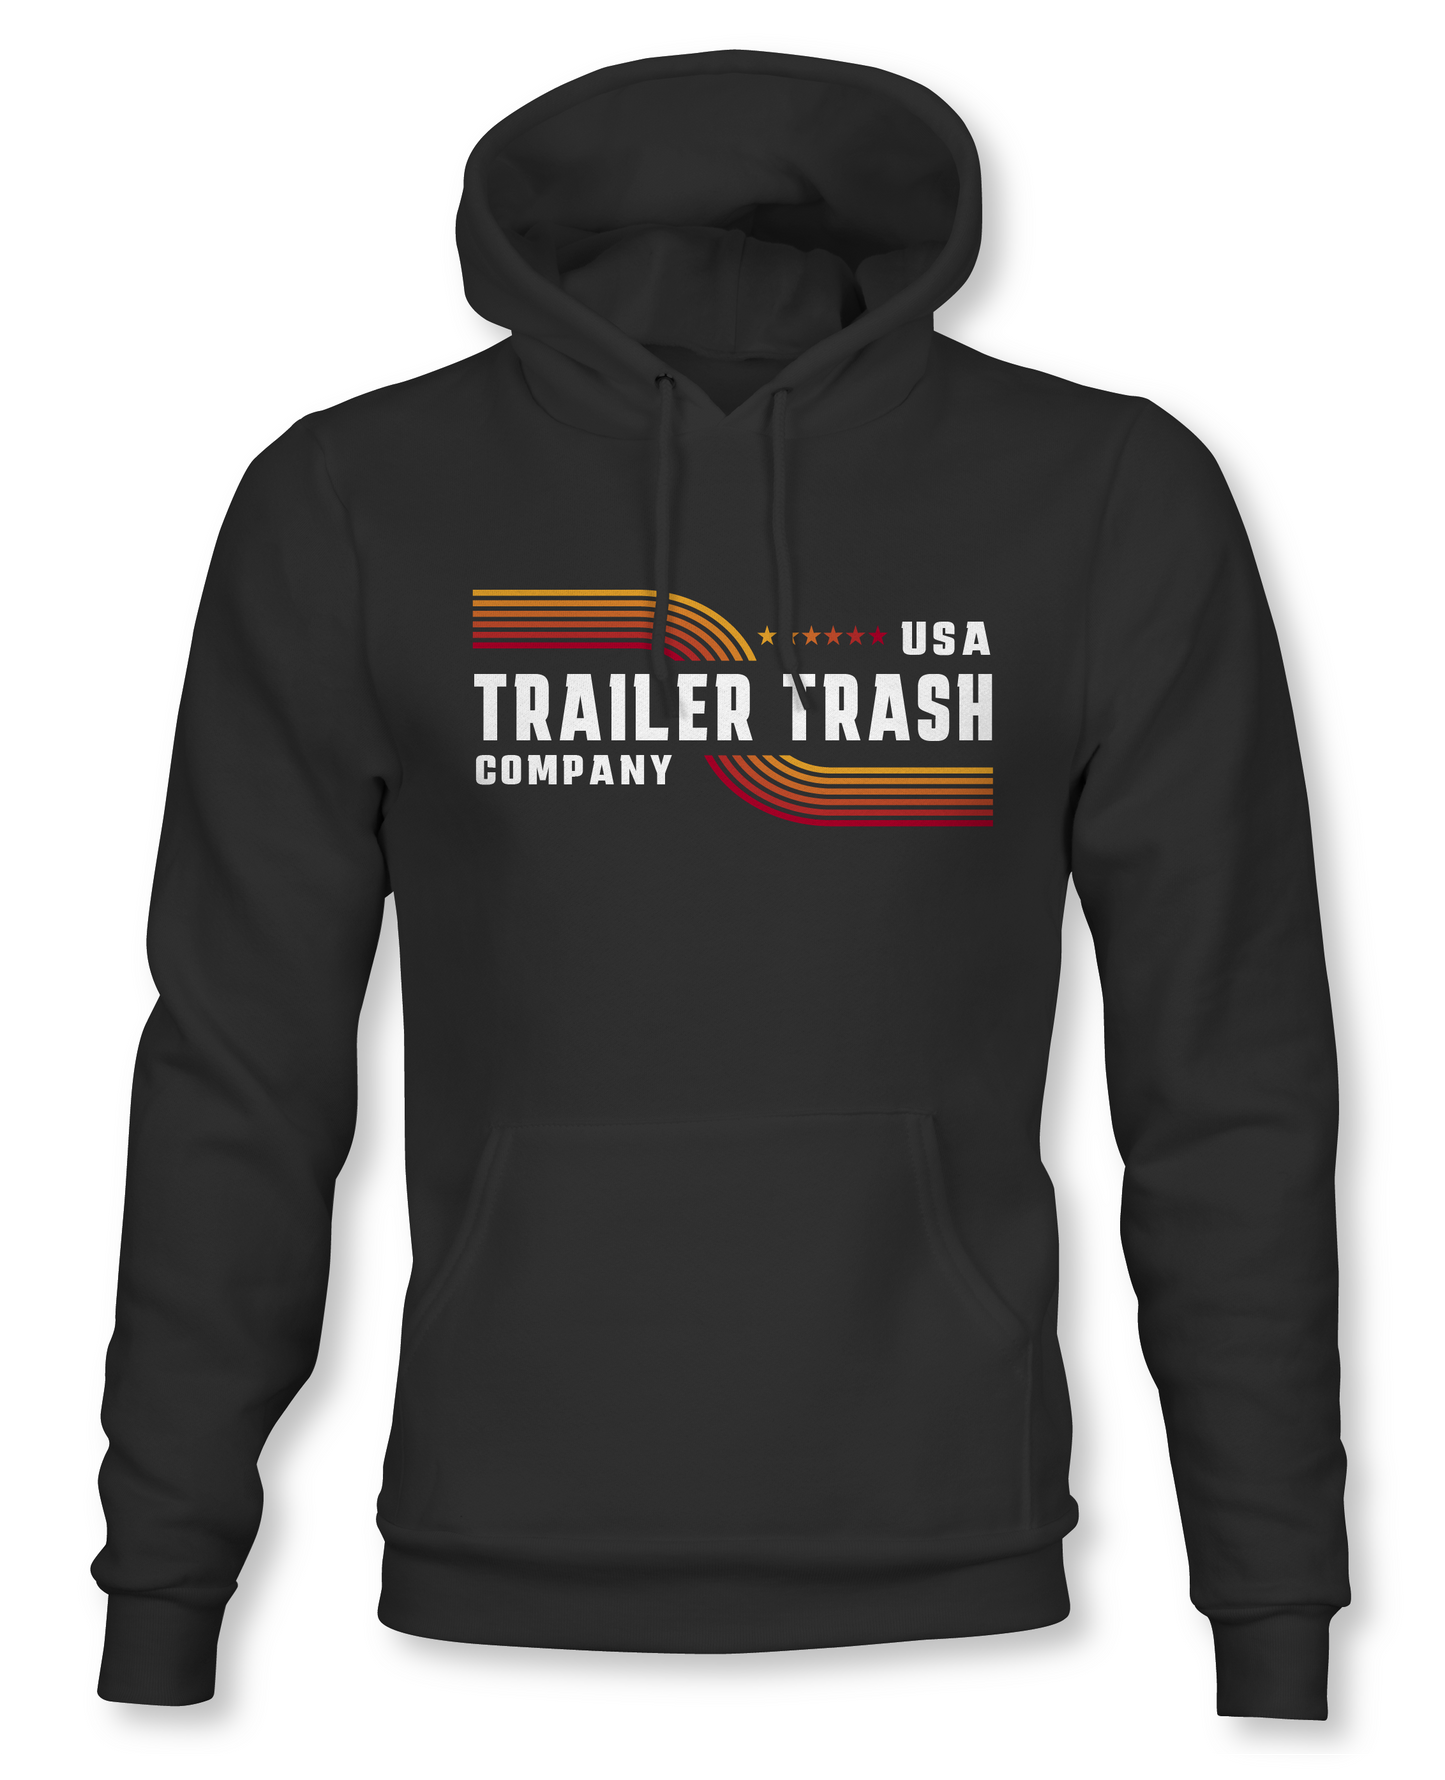 Retro Hoodie - Adult and Kids Sizes